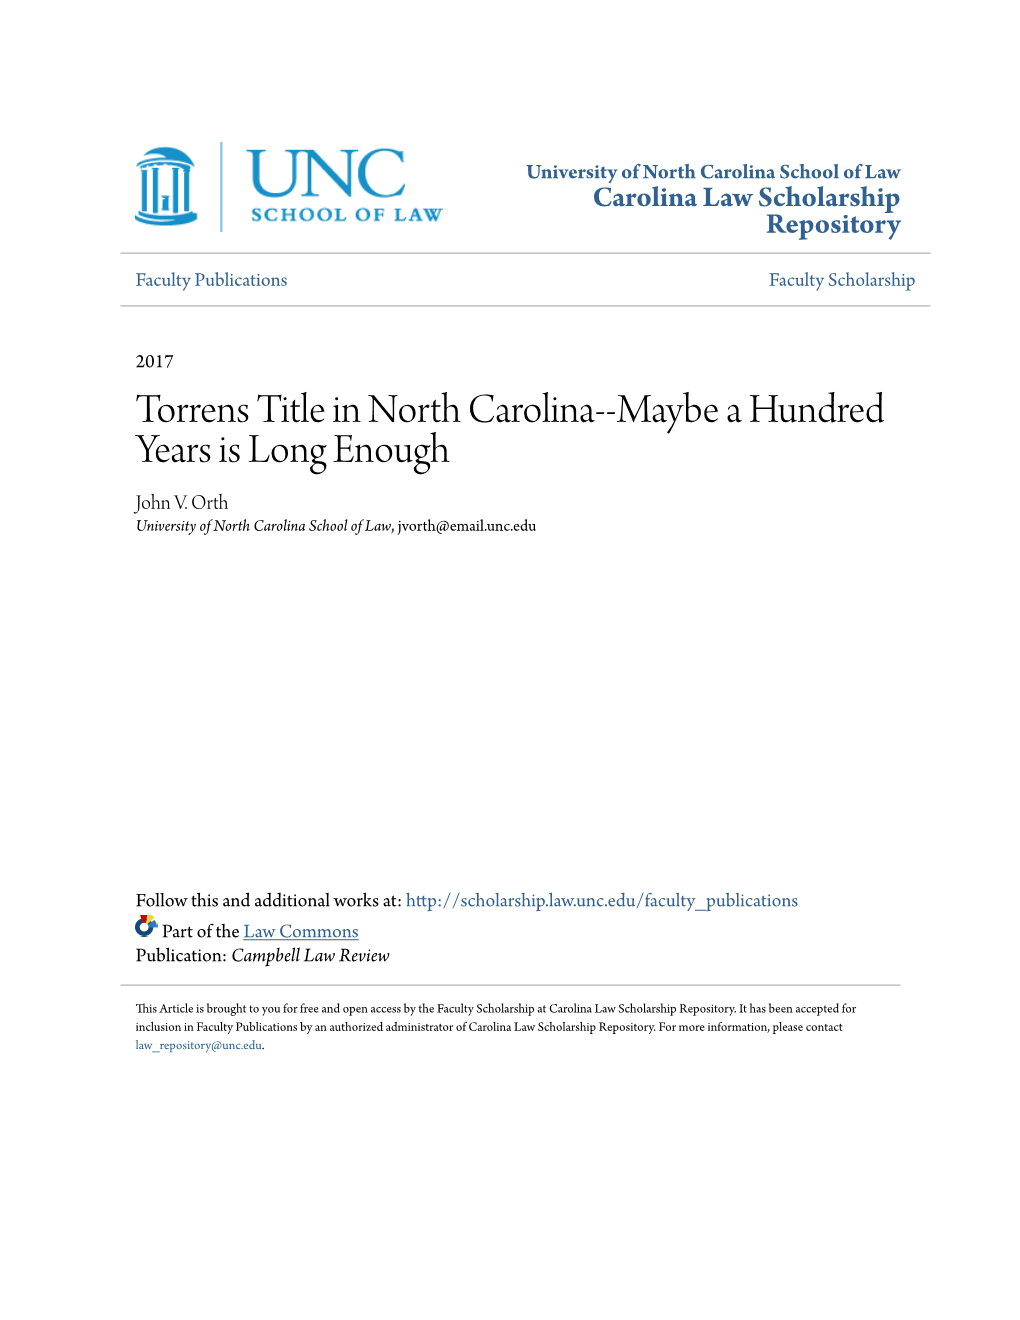 Torrens Title in North Carolina--Maybe a Hundred Years Is Long Enough John V